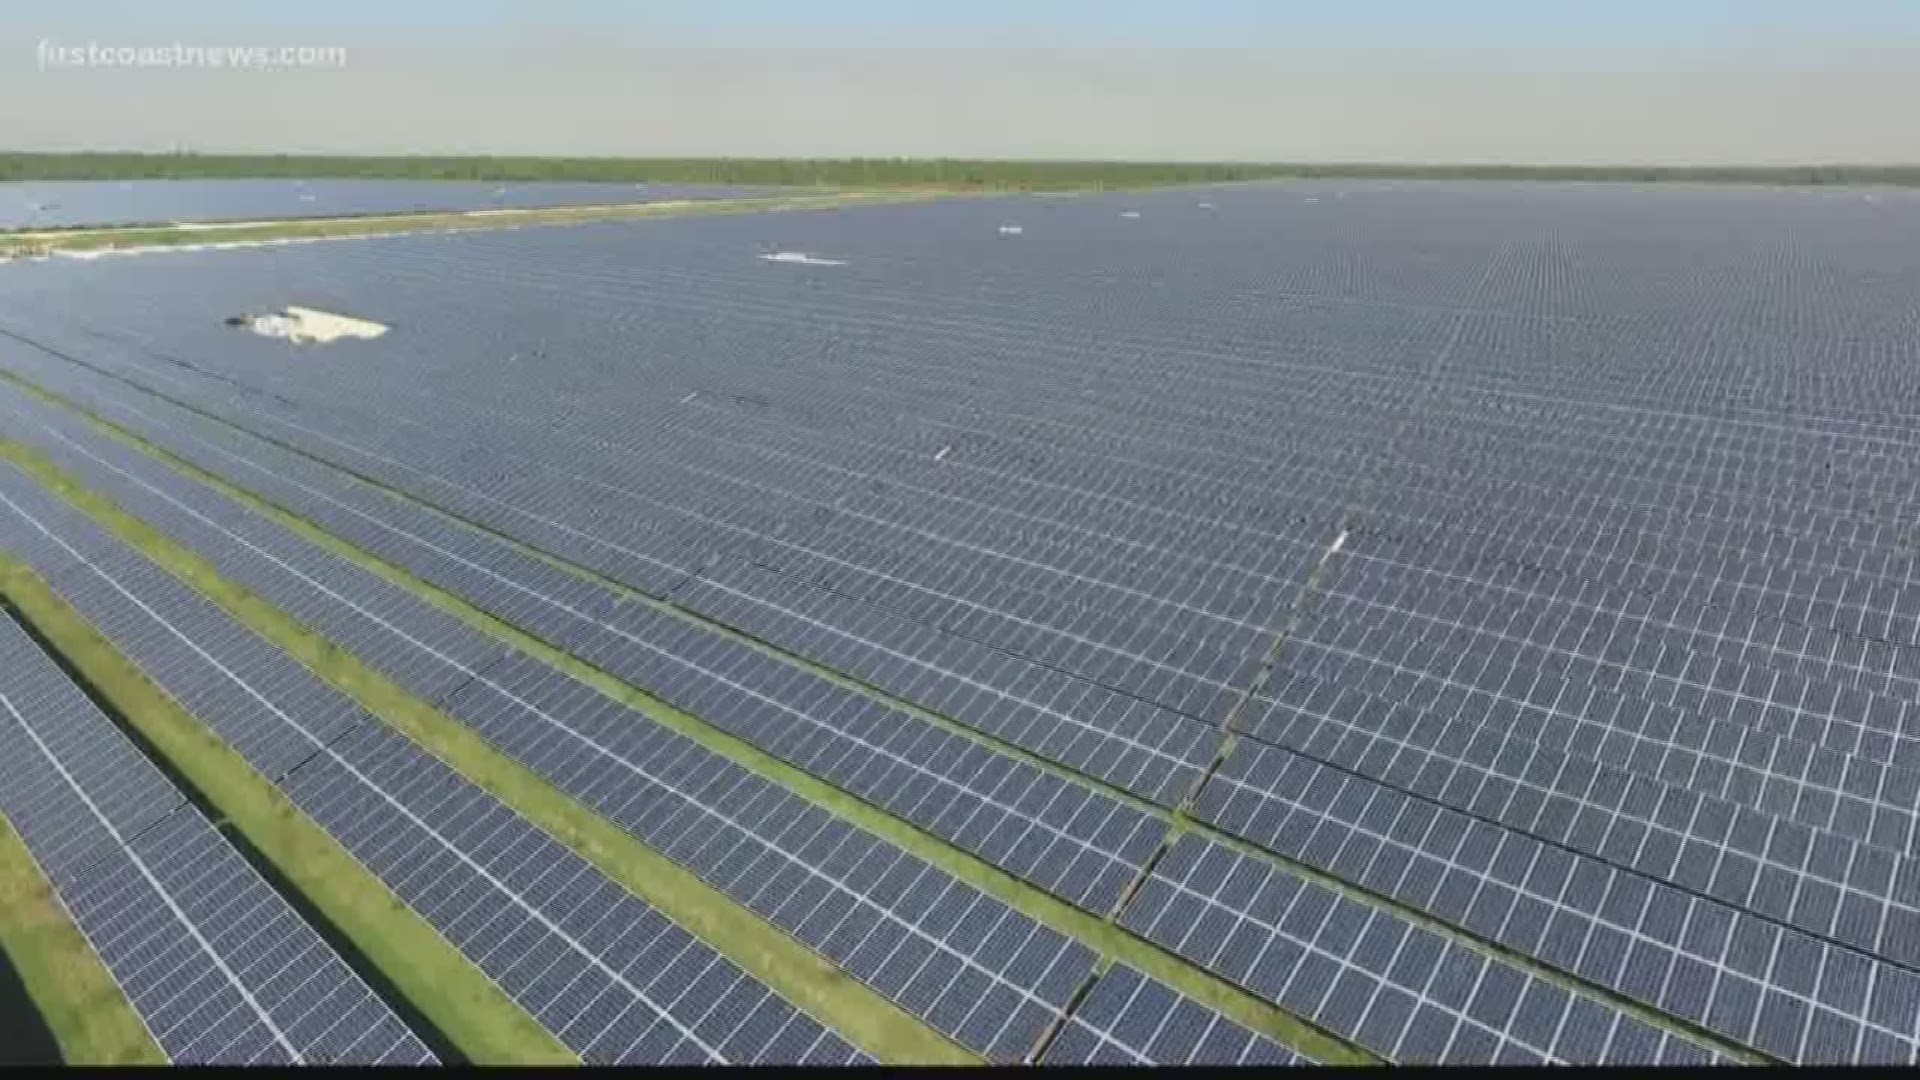 FPL aims to create the biggest utility-run solar community program in the nation by building 20 solar farms in Florida.